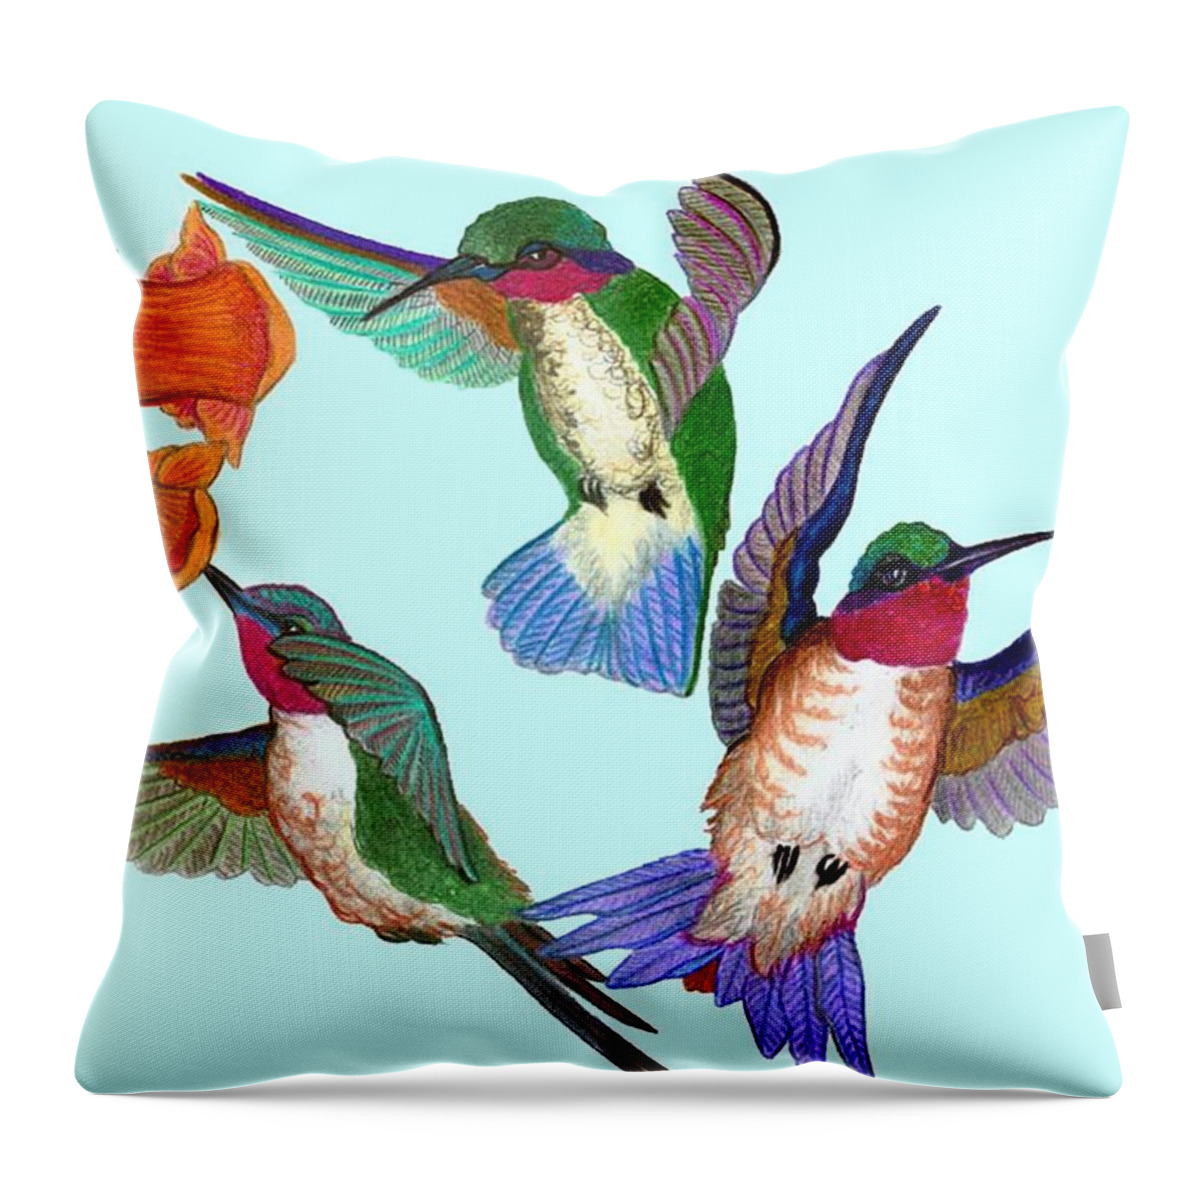 Hummingbirds Throw Pillow featuring the drawing Hummingbirds by Anthony Seeker